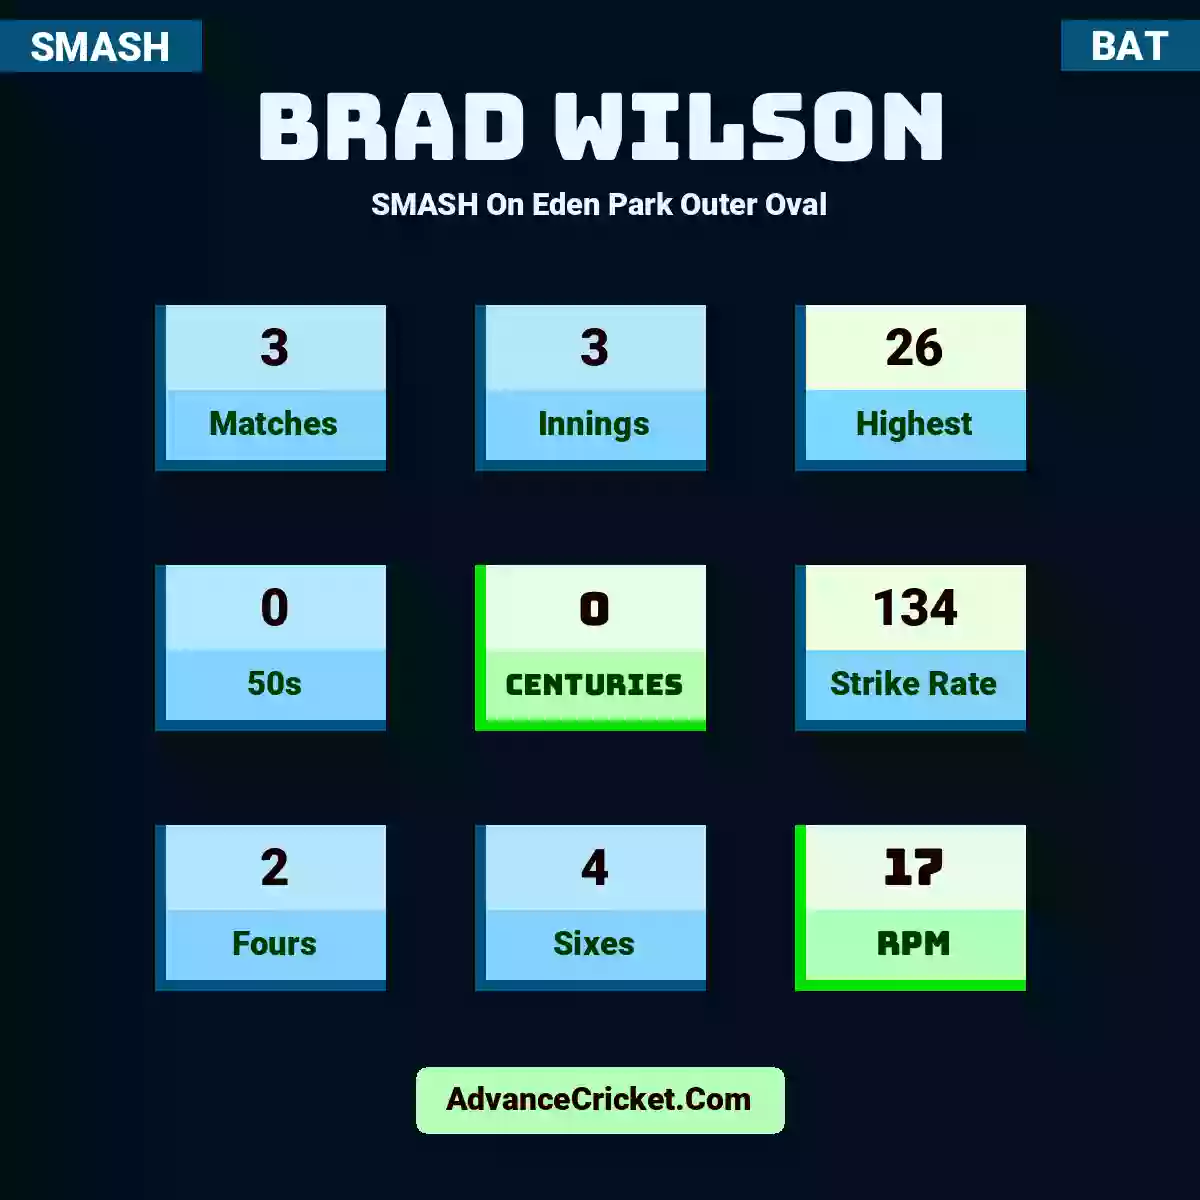 Brad Wilson SMASH  On Eden Park Outer Oval, Brad Wilson played 3 matches, scored 26 runs as highest, 0 half-centuries, and 0 centuries, with a strike rate of 134. B.Wilson hit 2 fours and 4 sixes, with an RPM of 17.